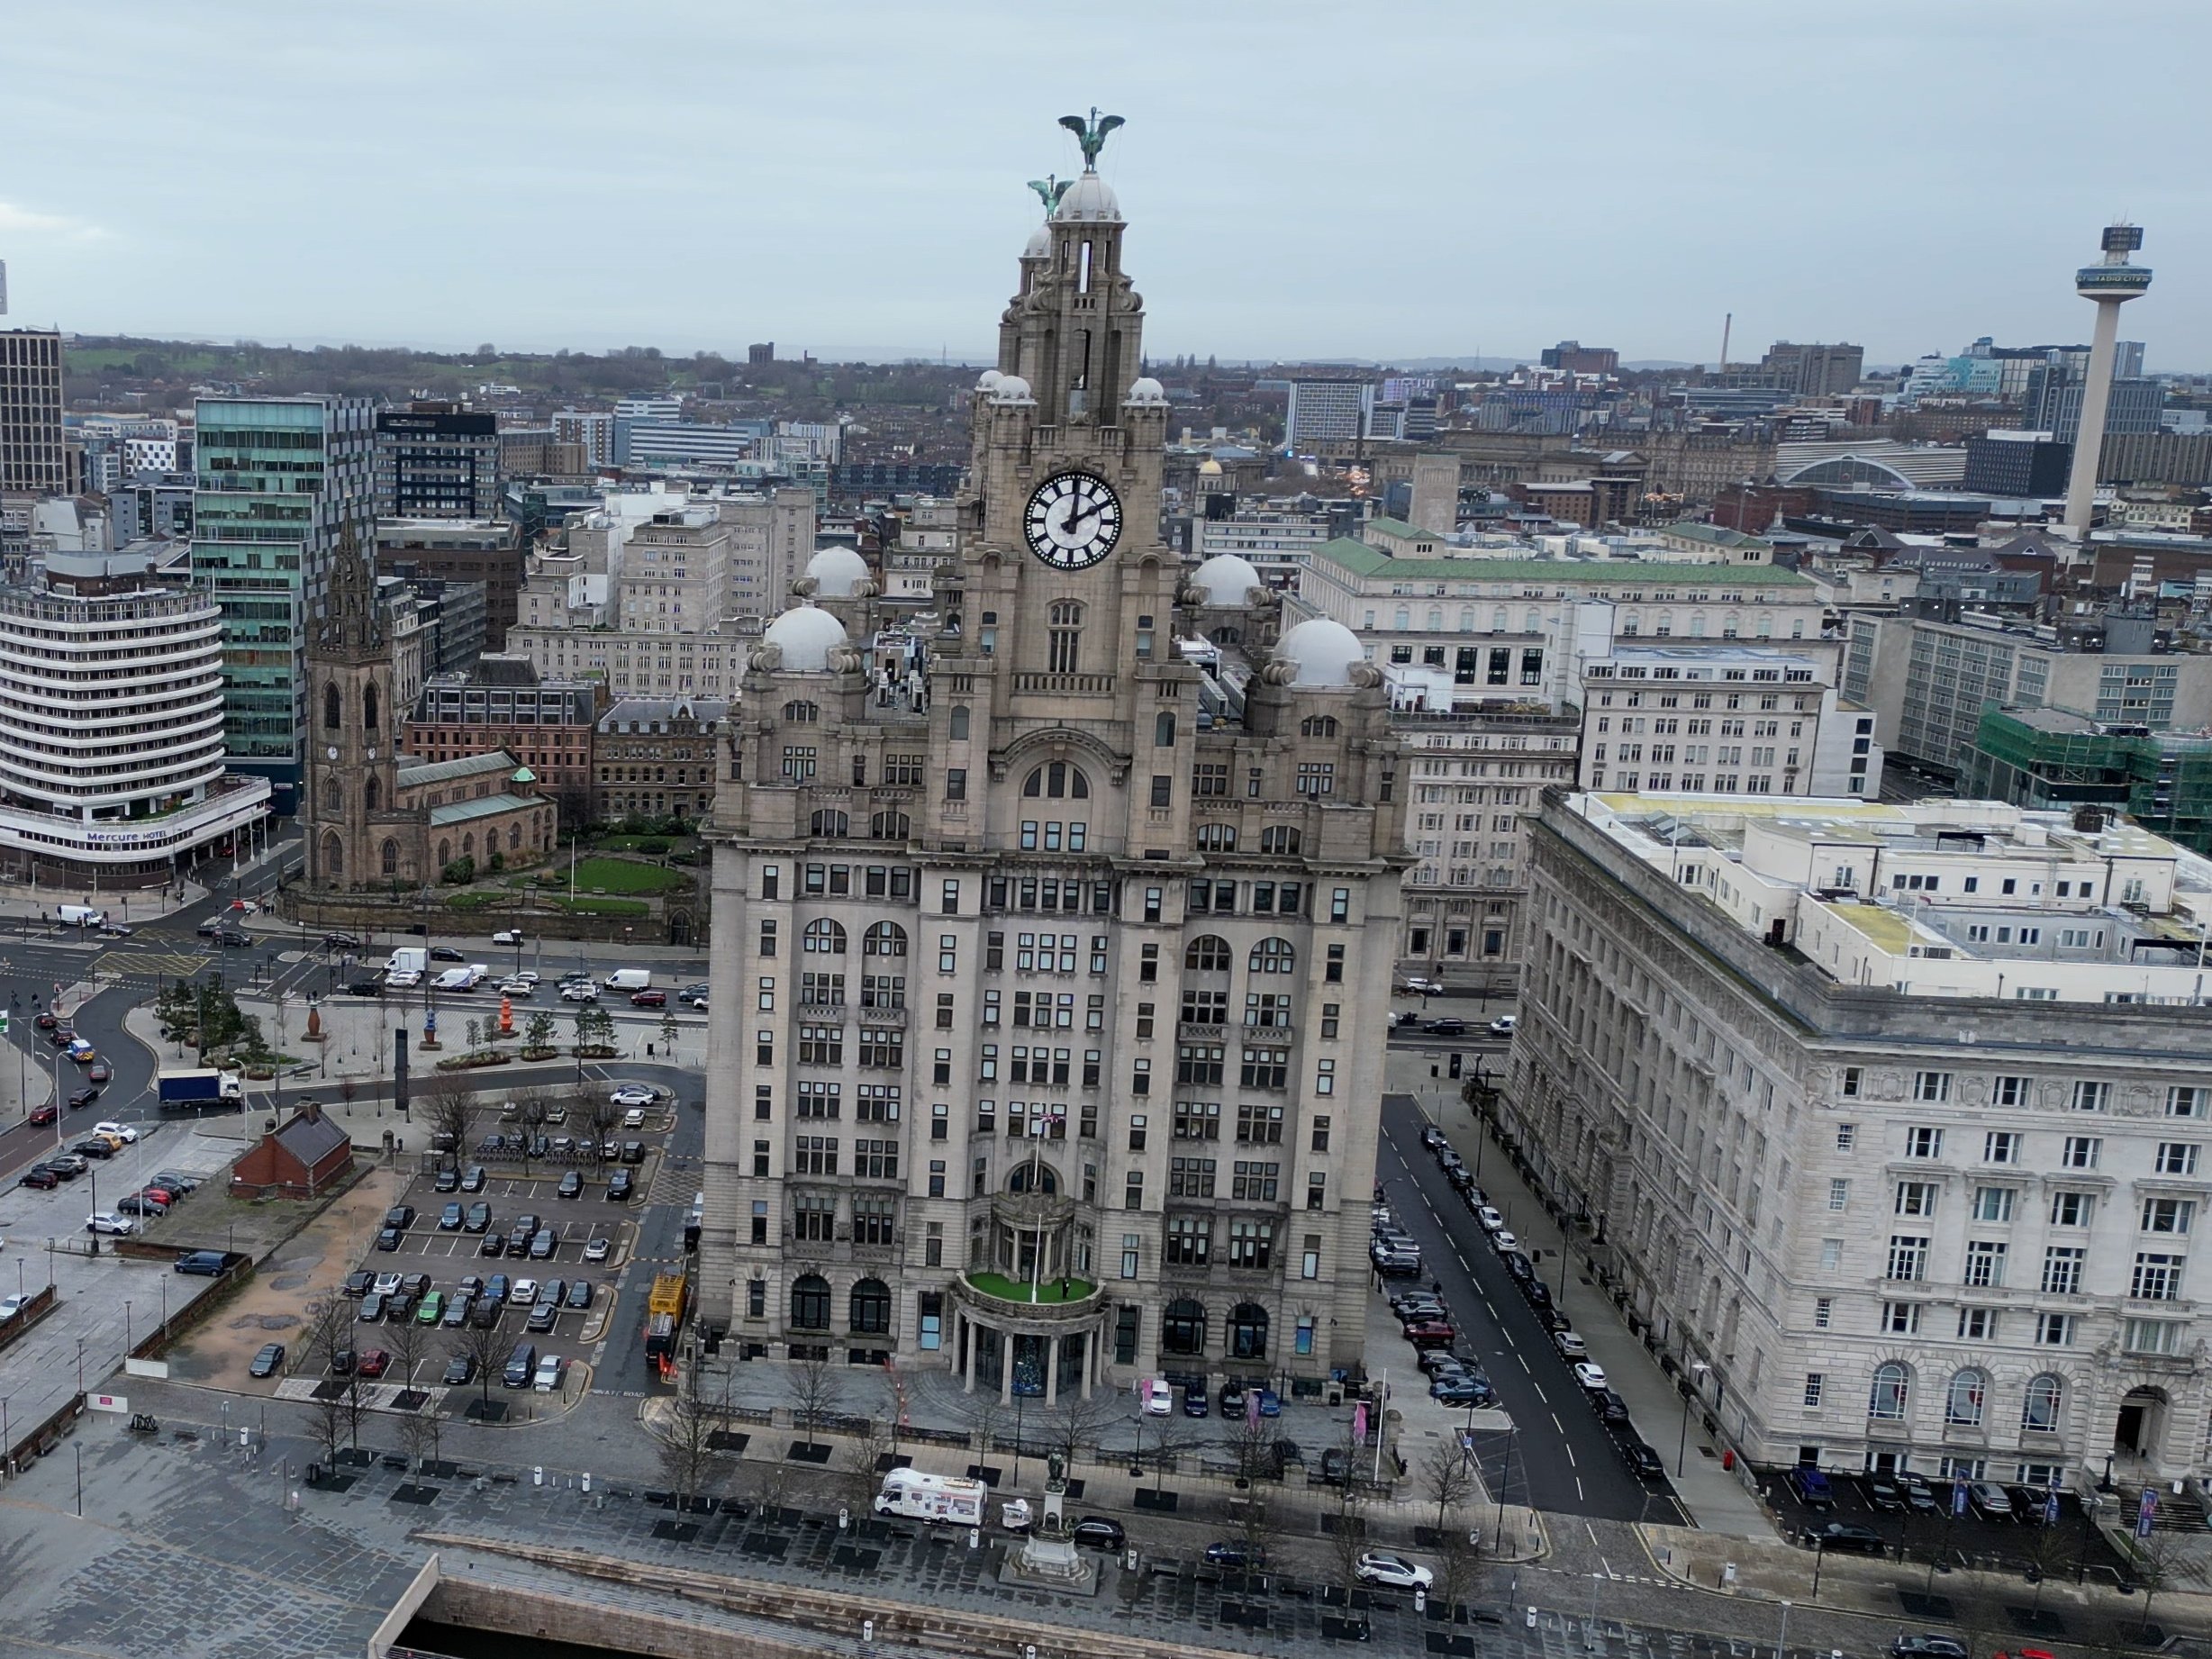 Drone shot of the Liver Building high up